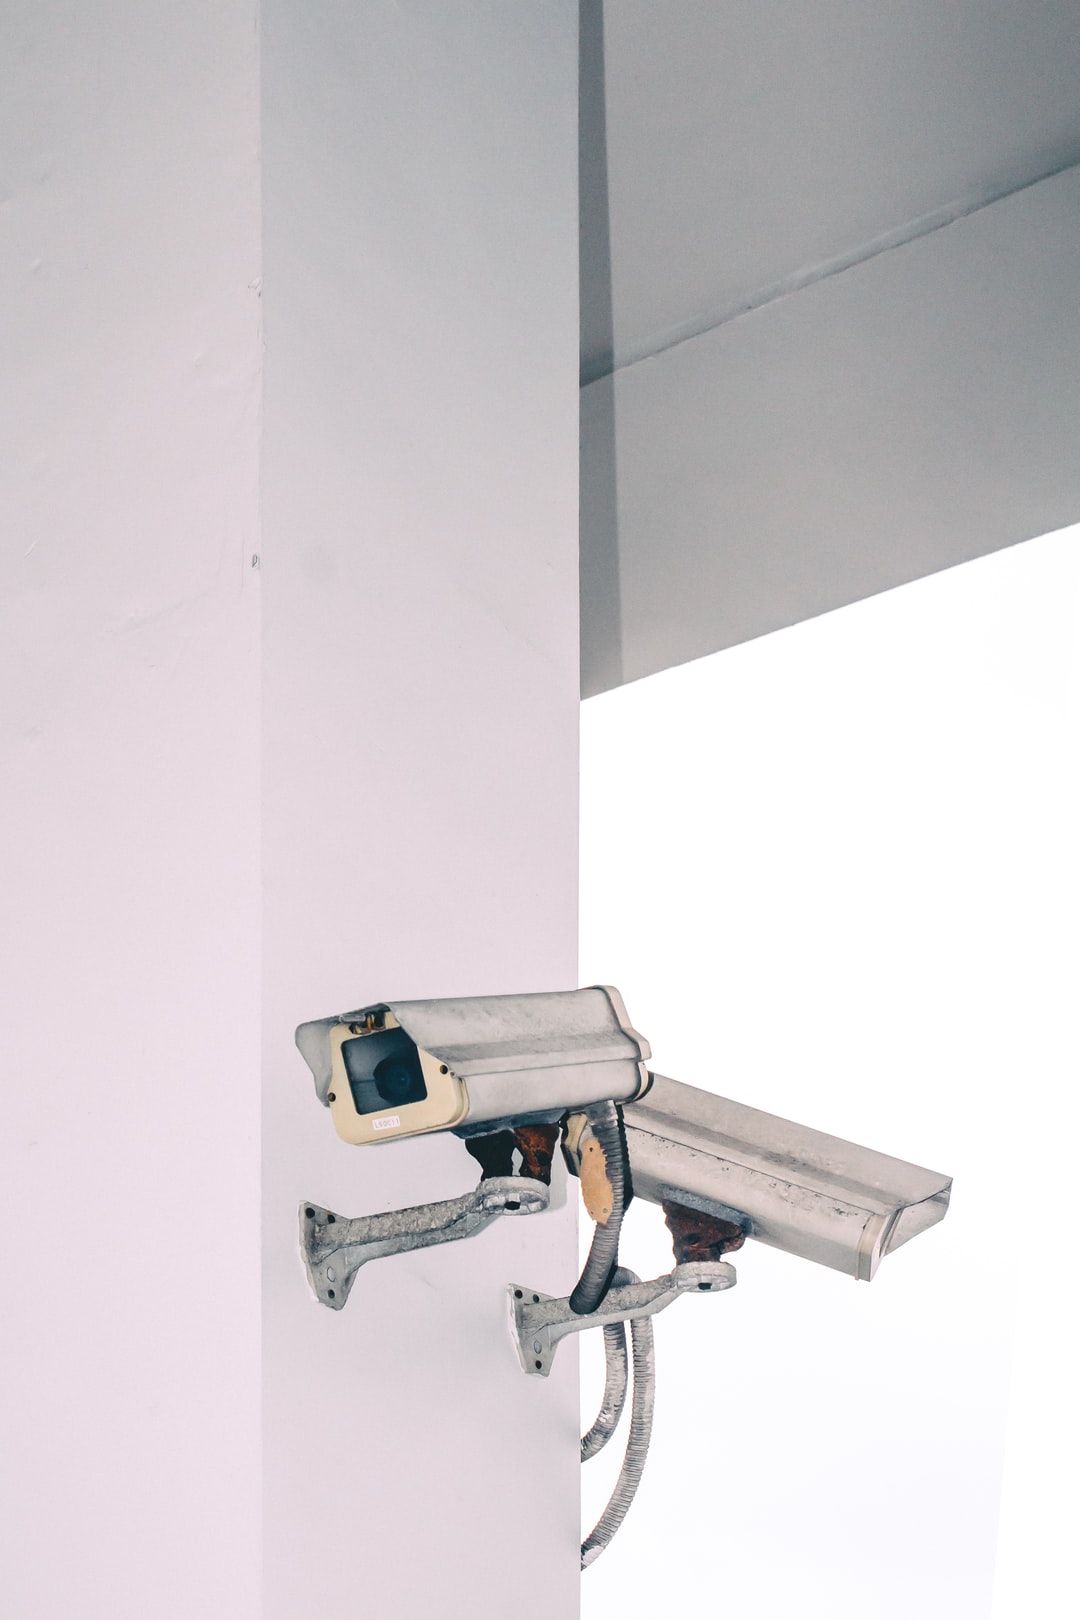 Security Cameras Picture. Download Free Image